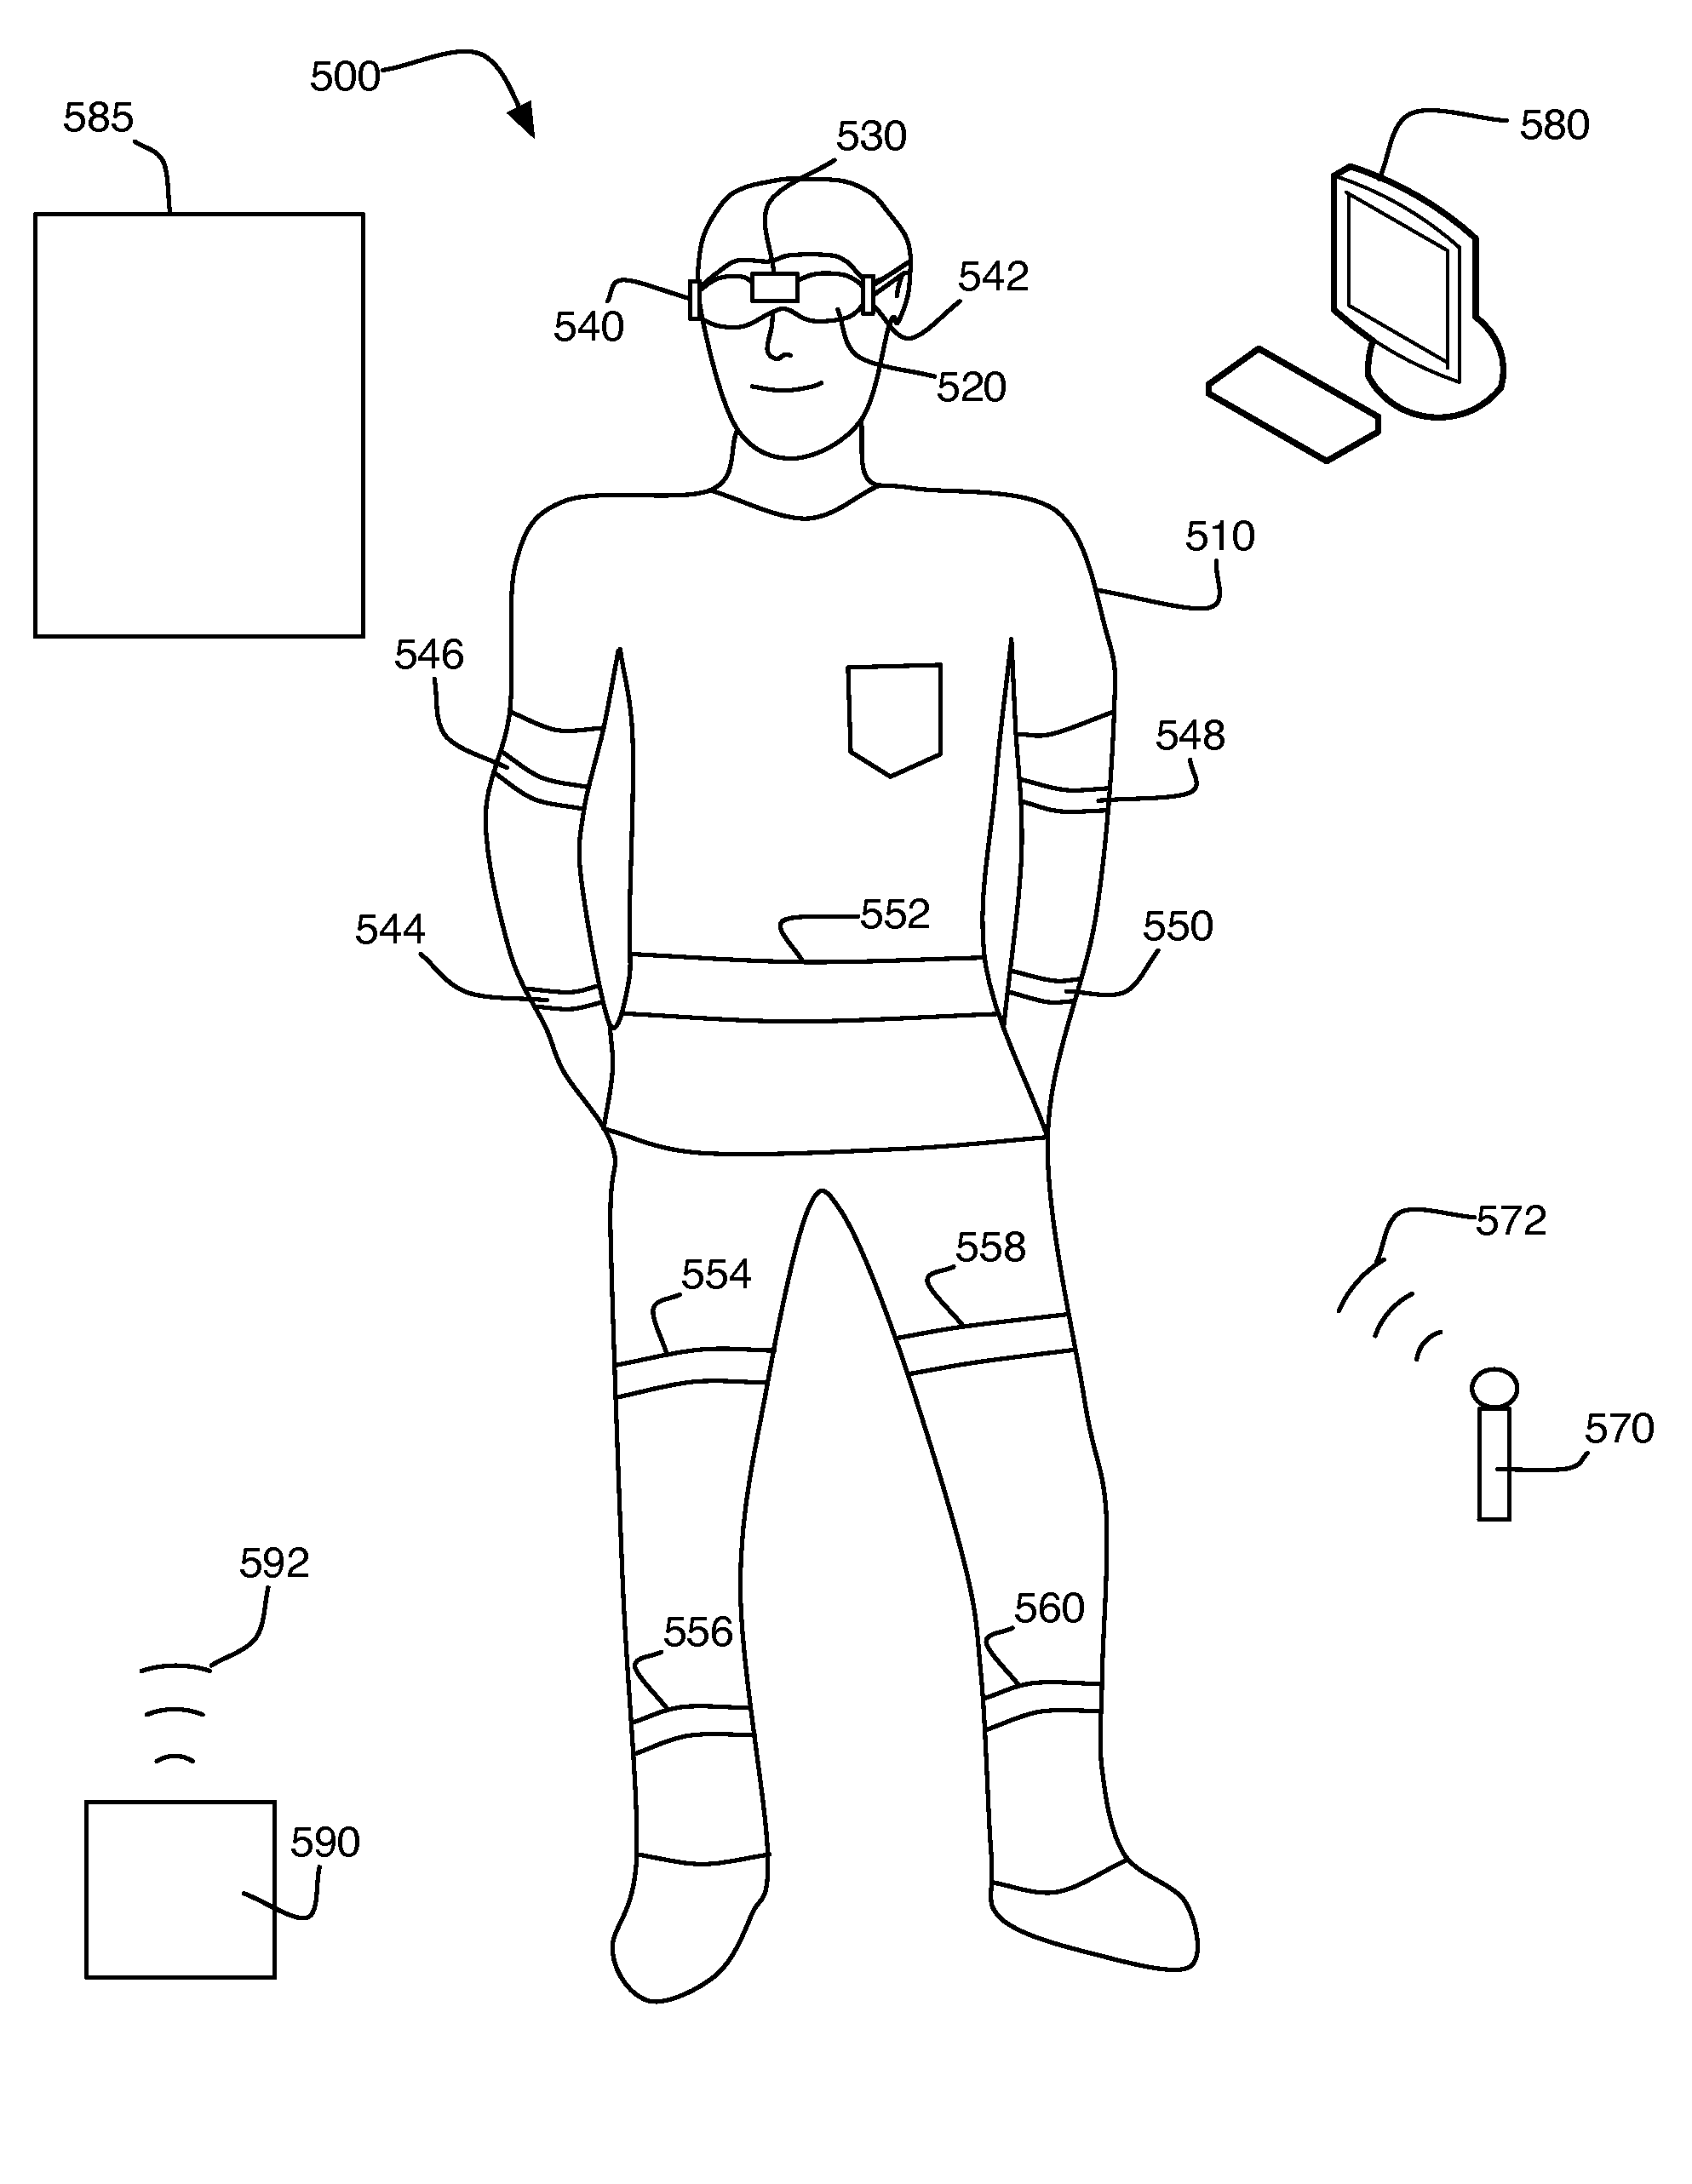 Wearable sensors with heads-up display